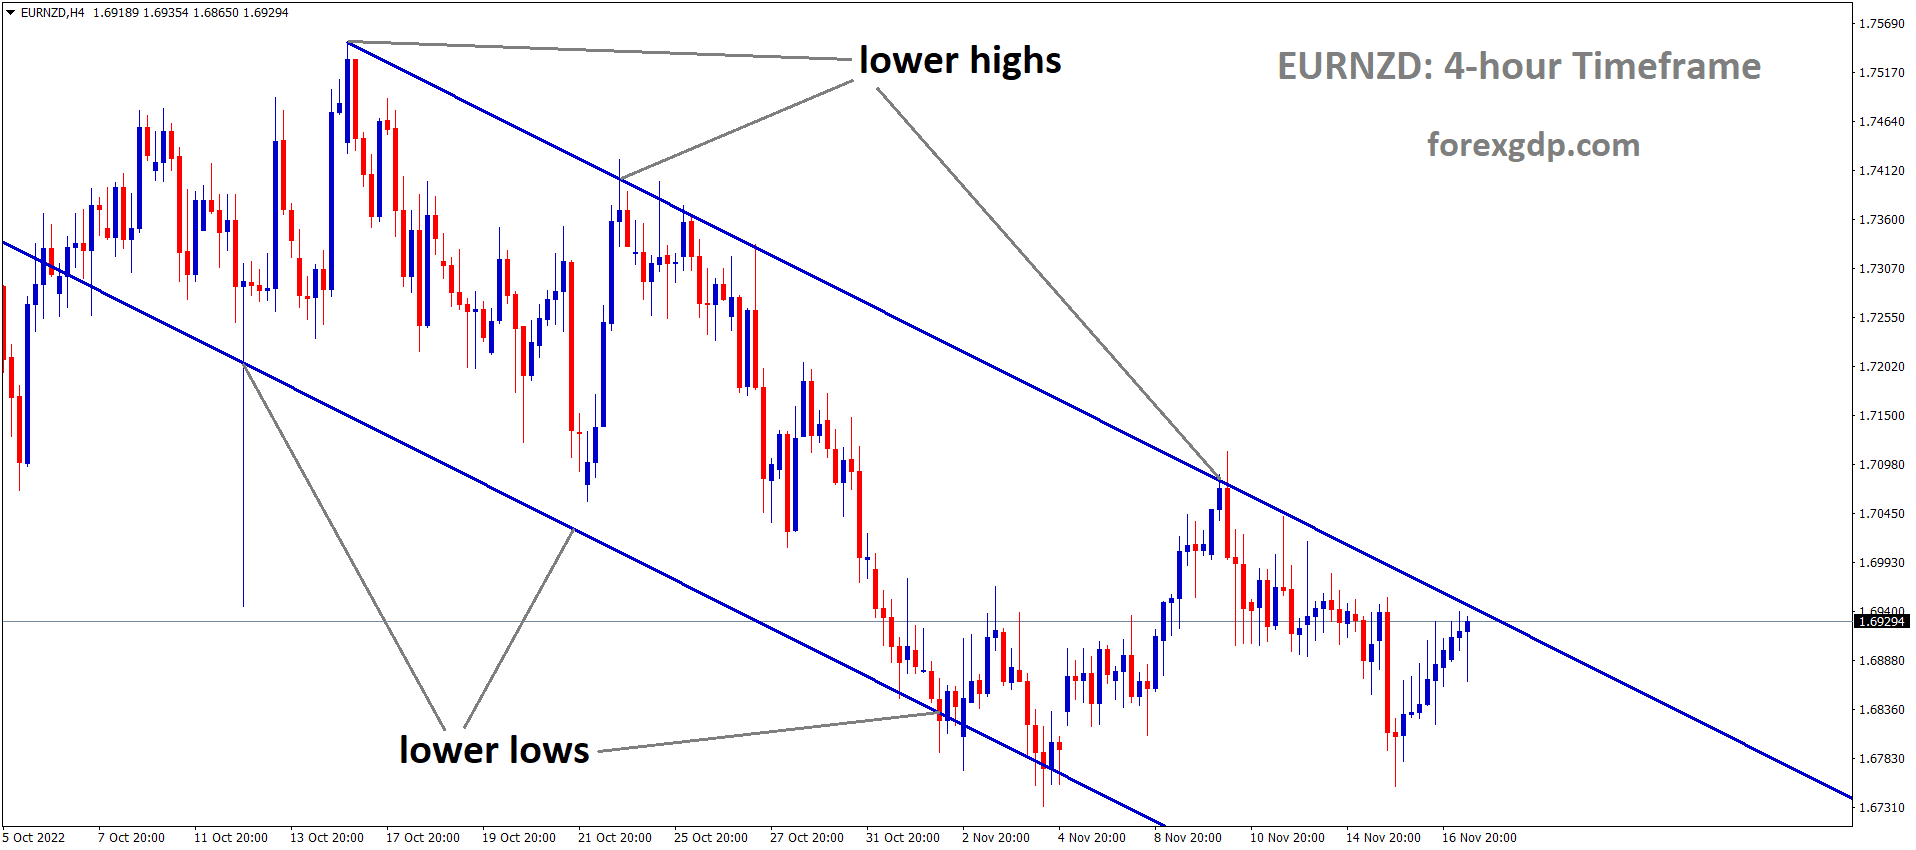 EURNZD is moving in the Descending channel and the market has reached the lower high area of the channel